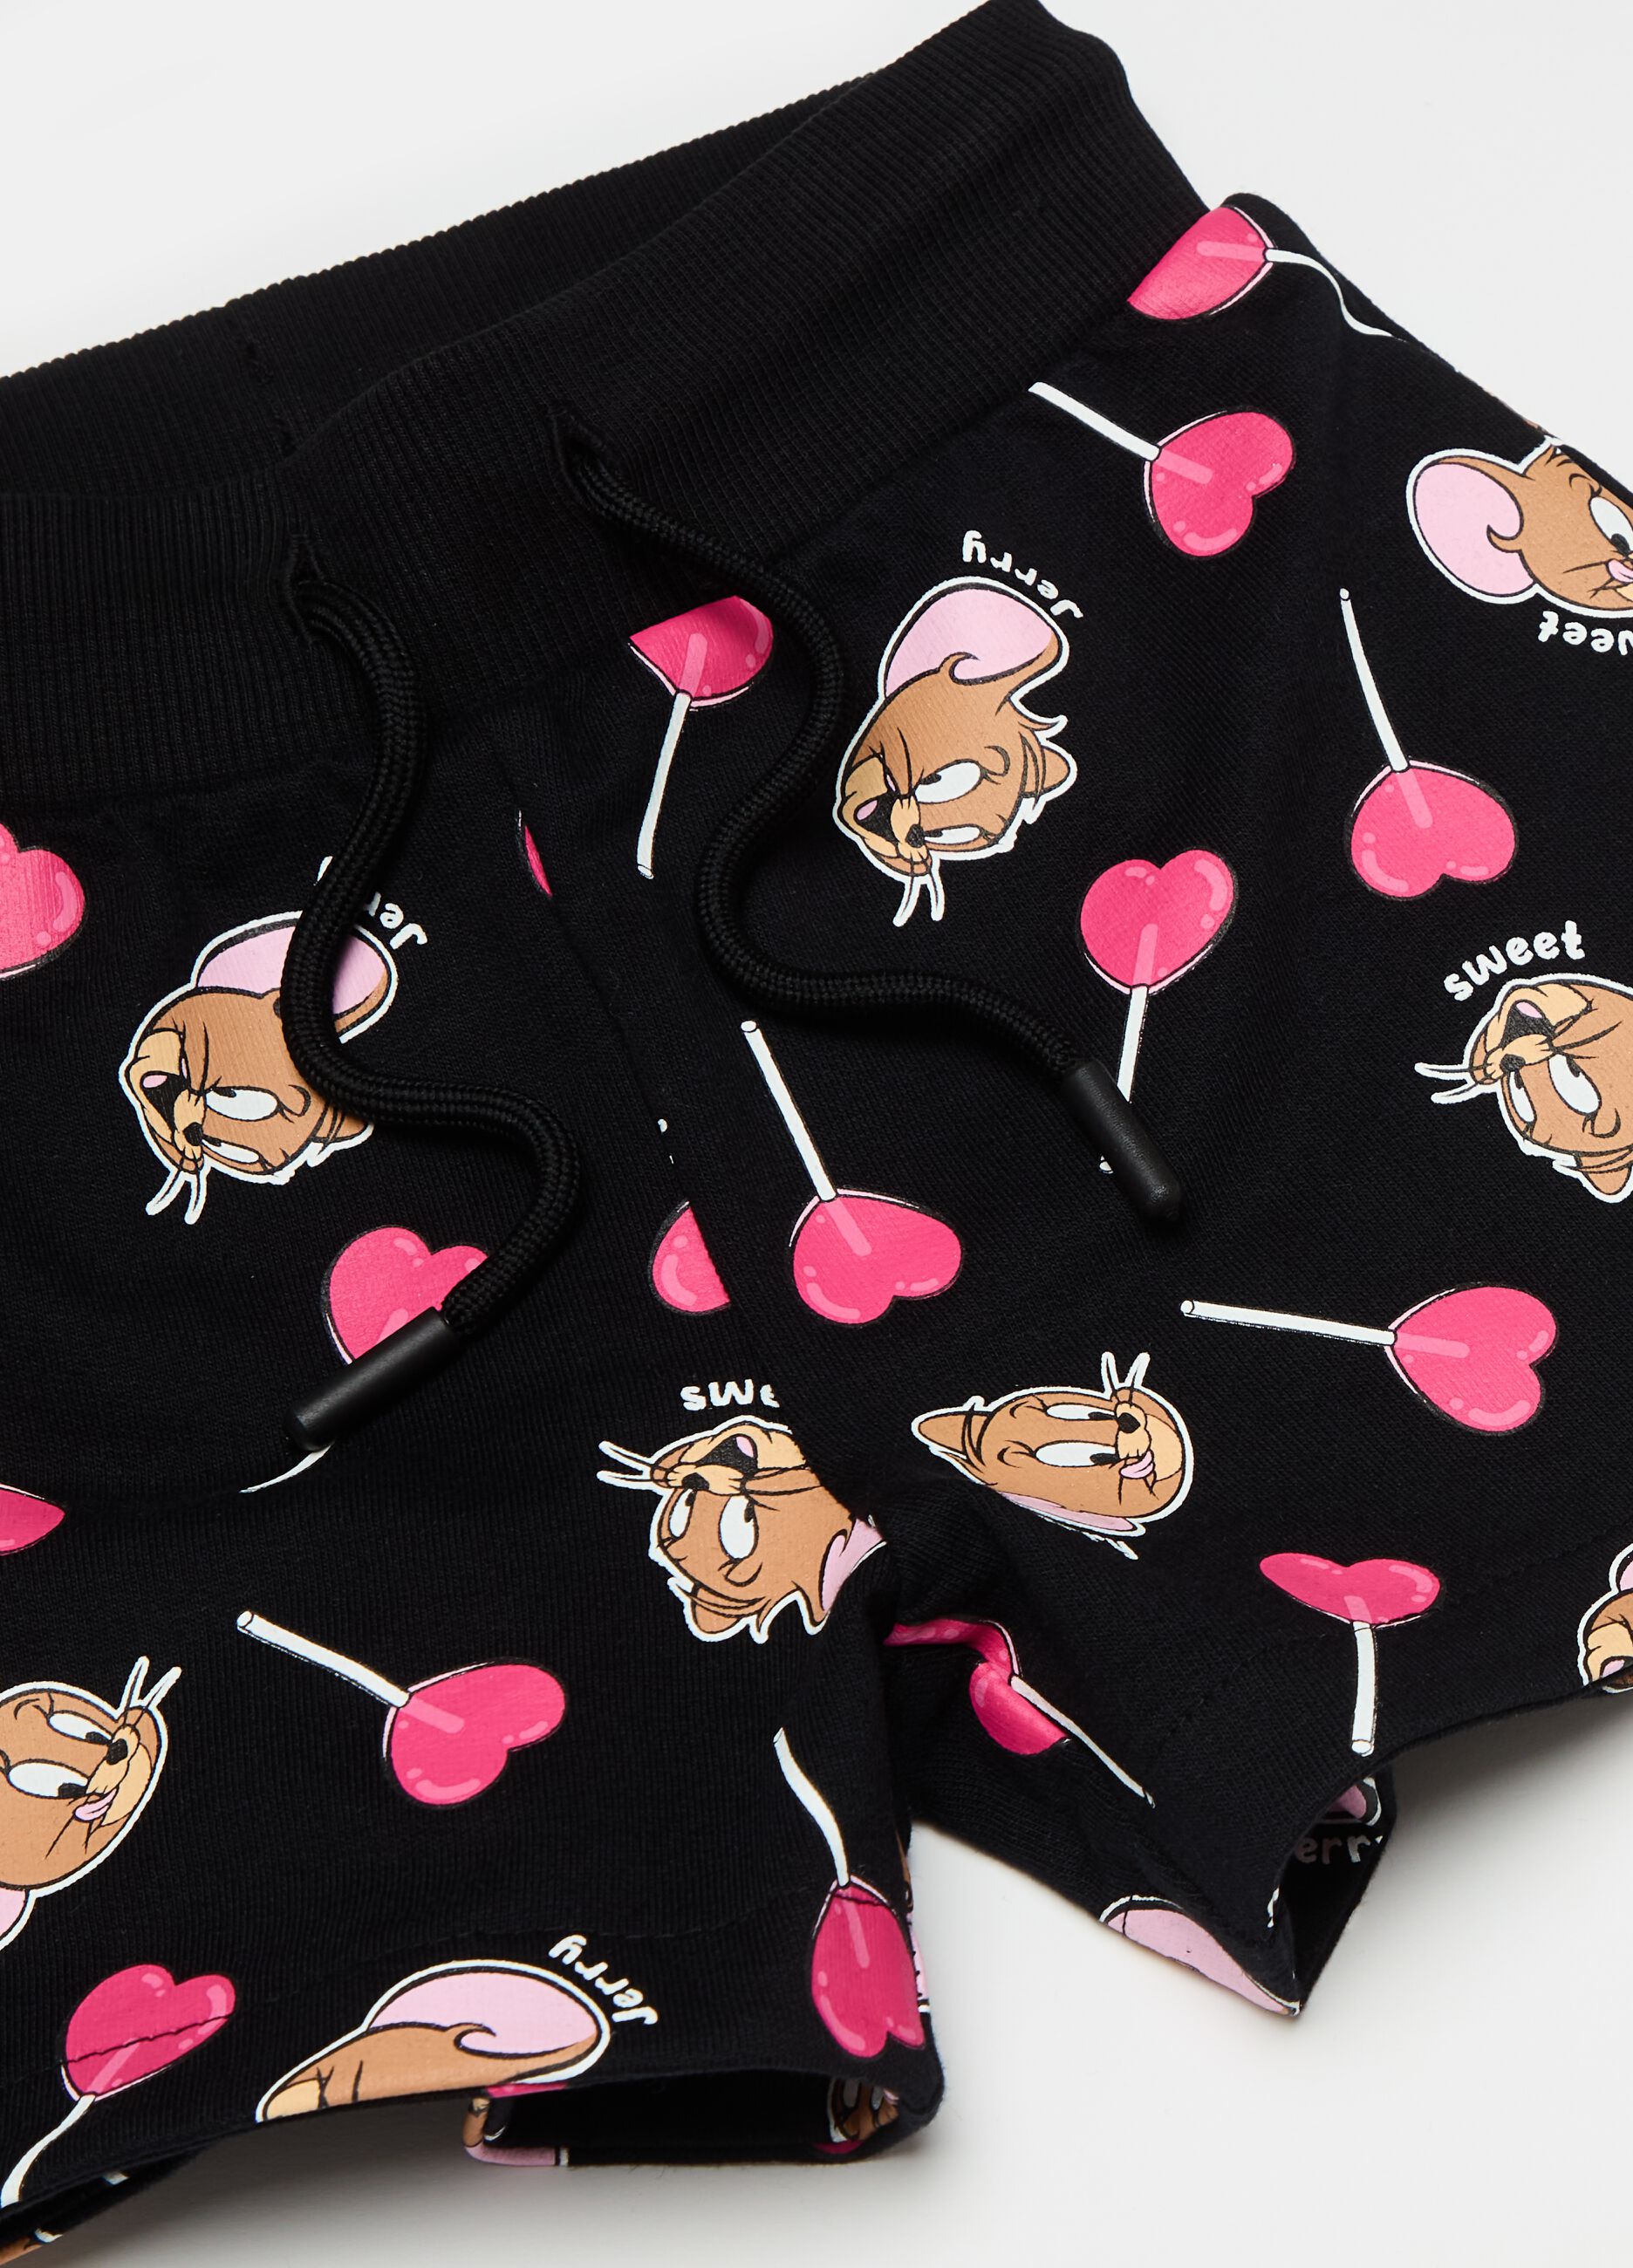 Cotton shorts with Tom & Jerry print